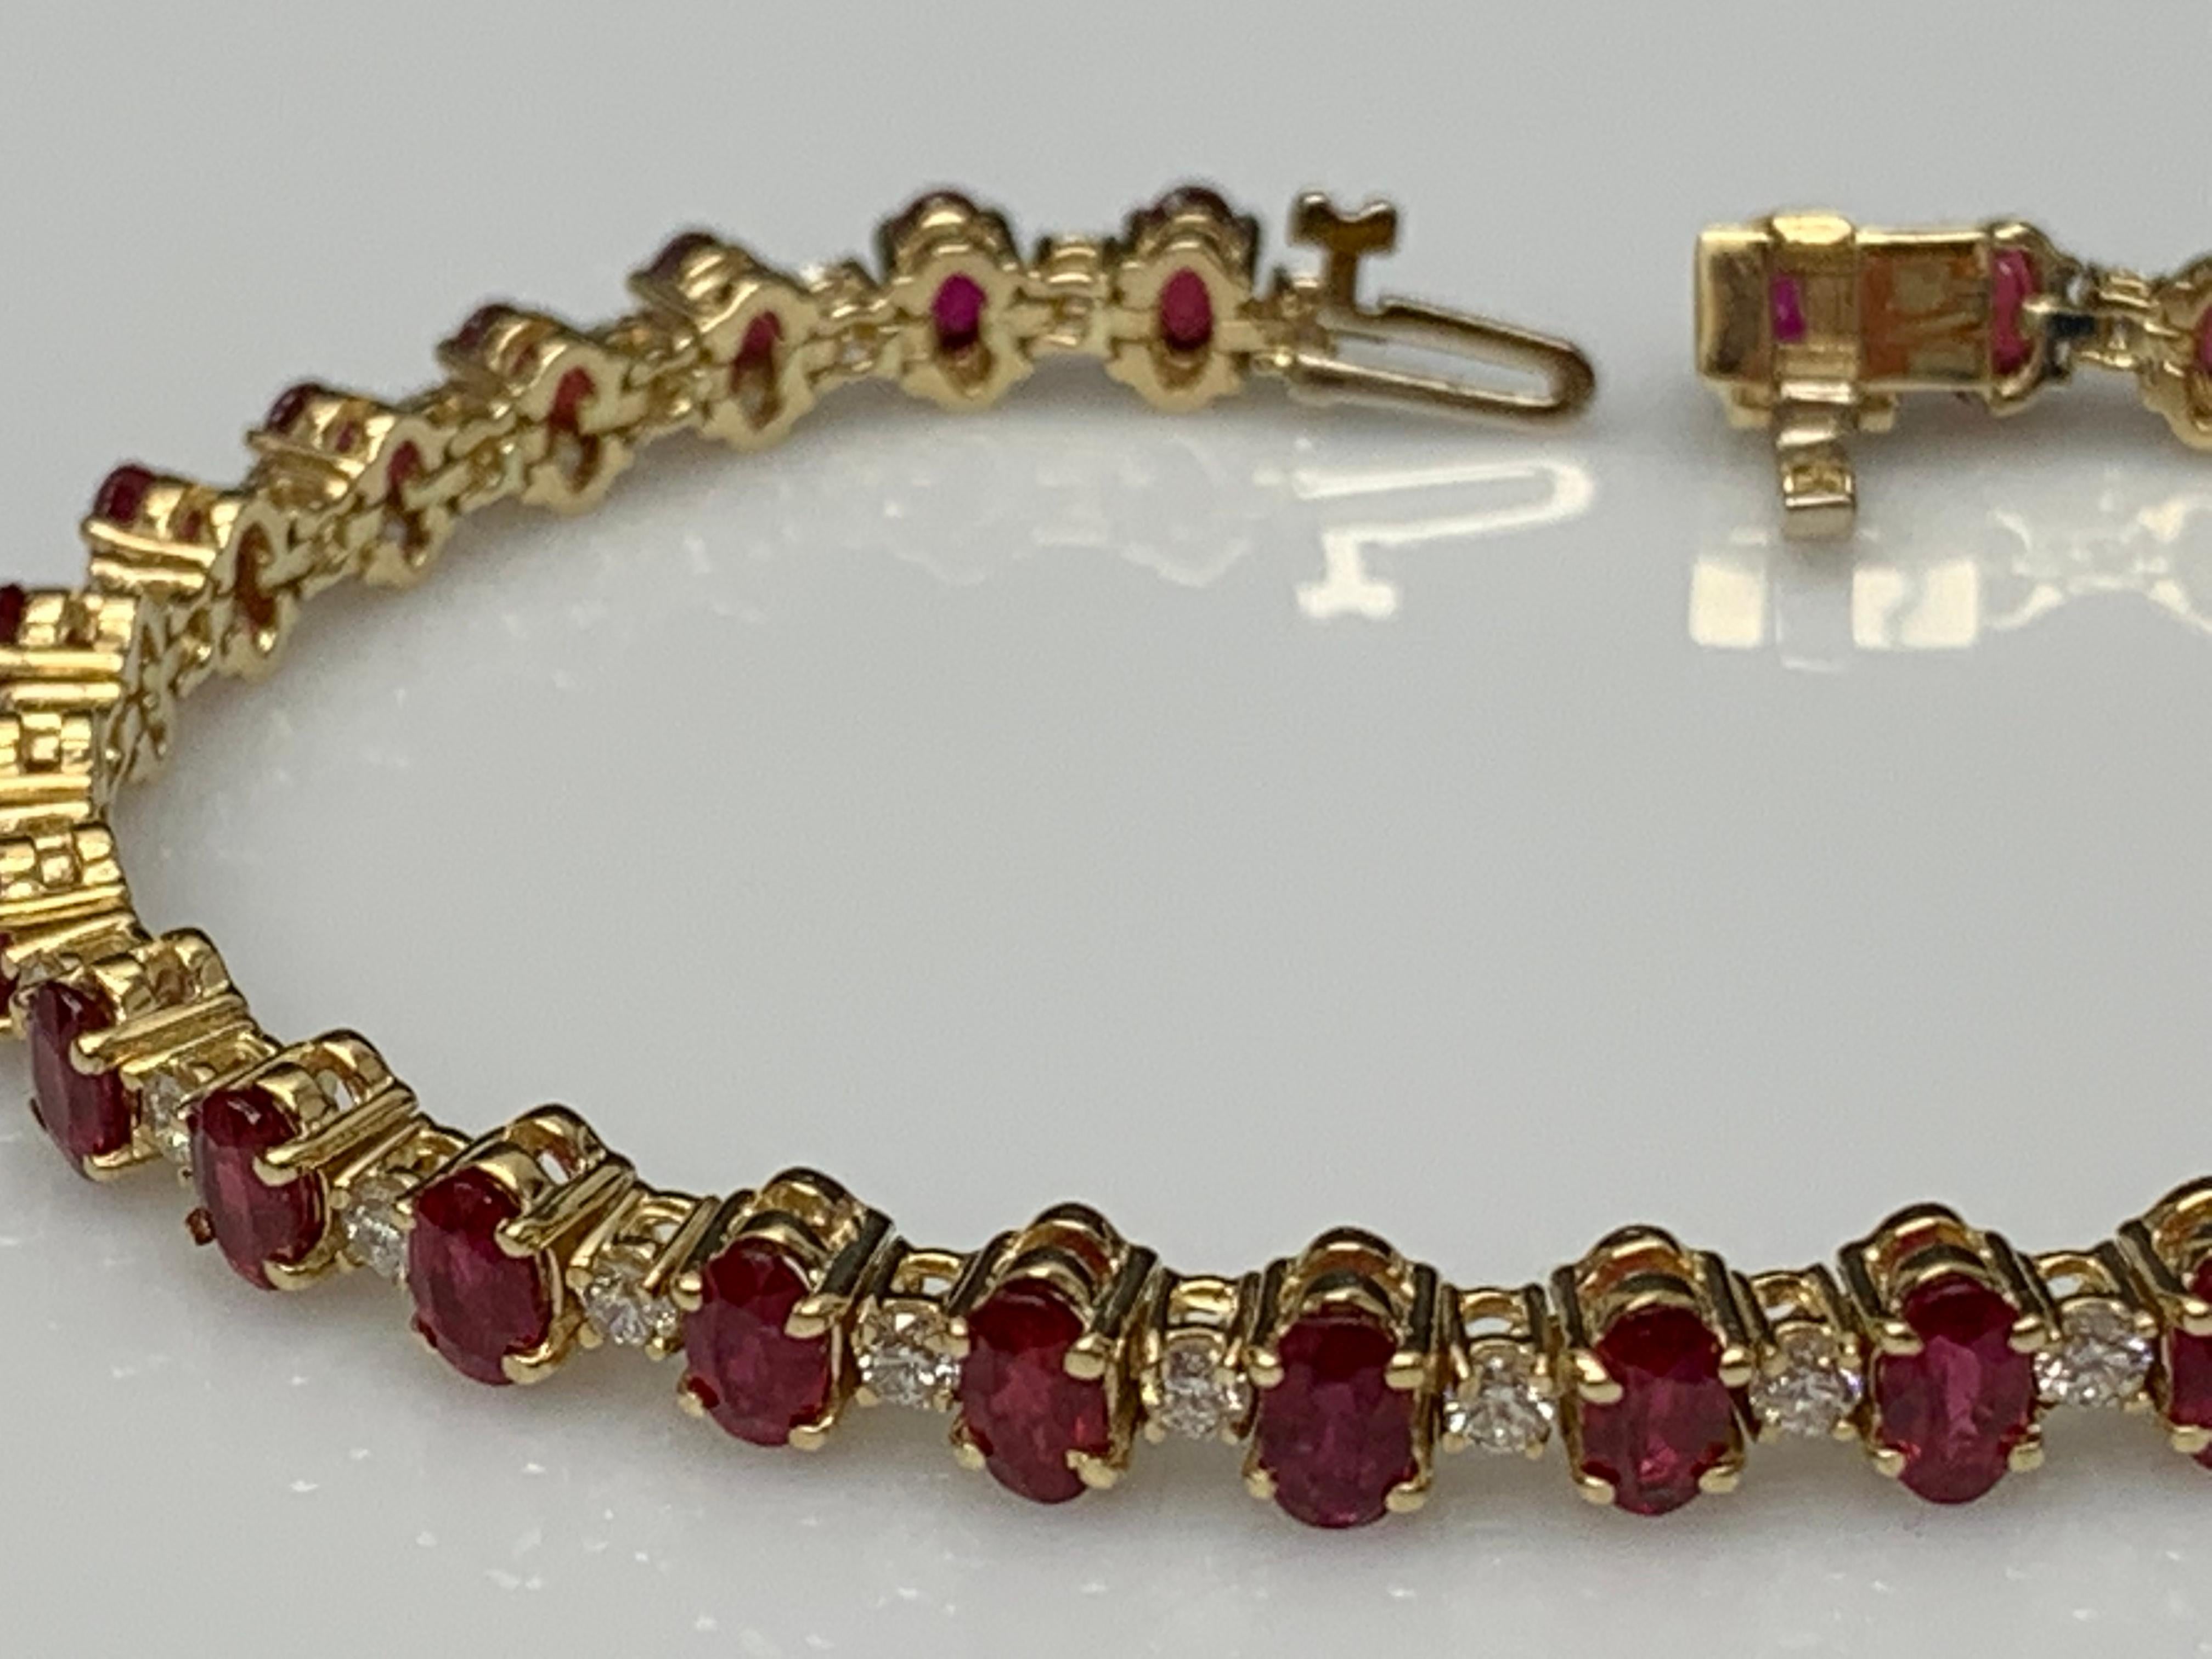 Grandeur 9.27 Carats Oval Cut Ruby and Diamond Bracelet in 14k Yellow Gold For Sale 5